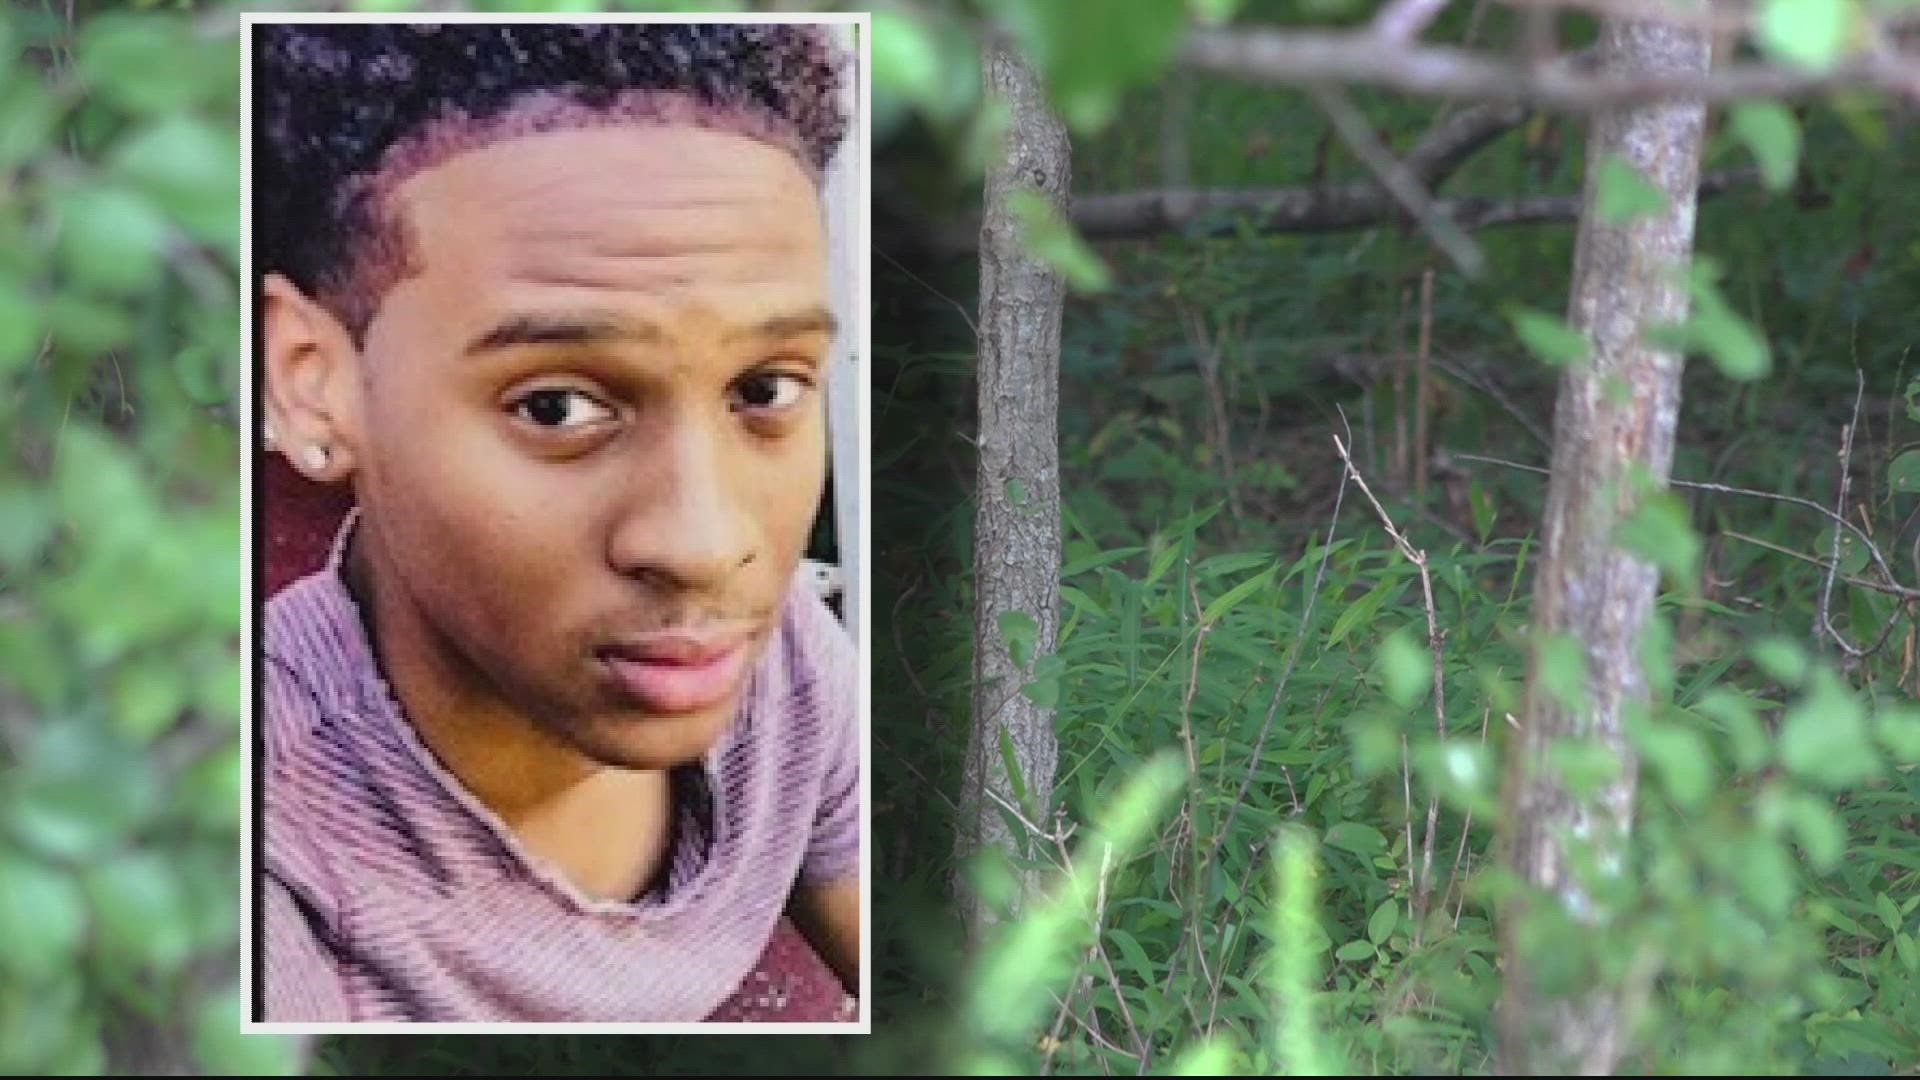 A two-year missing person mystery has been solved after human remains found in a Prince George's County forest months ago have been identified.